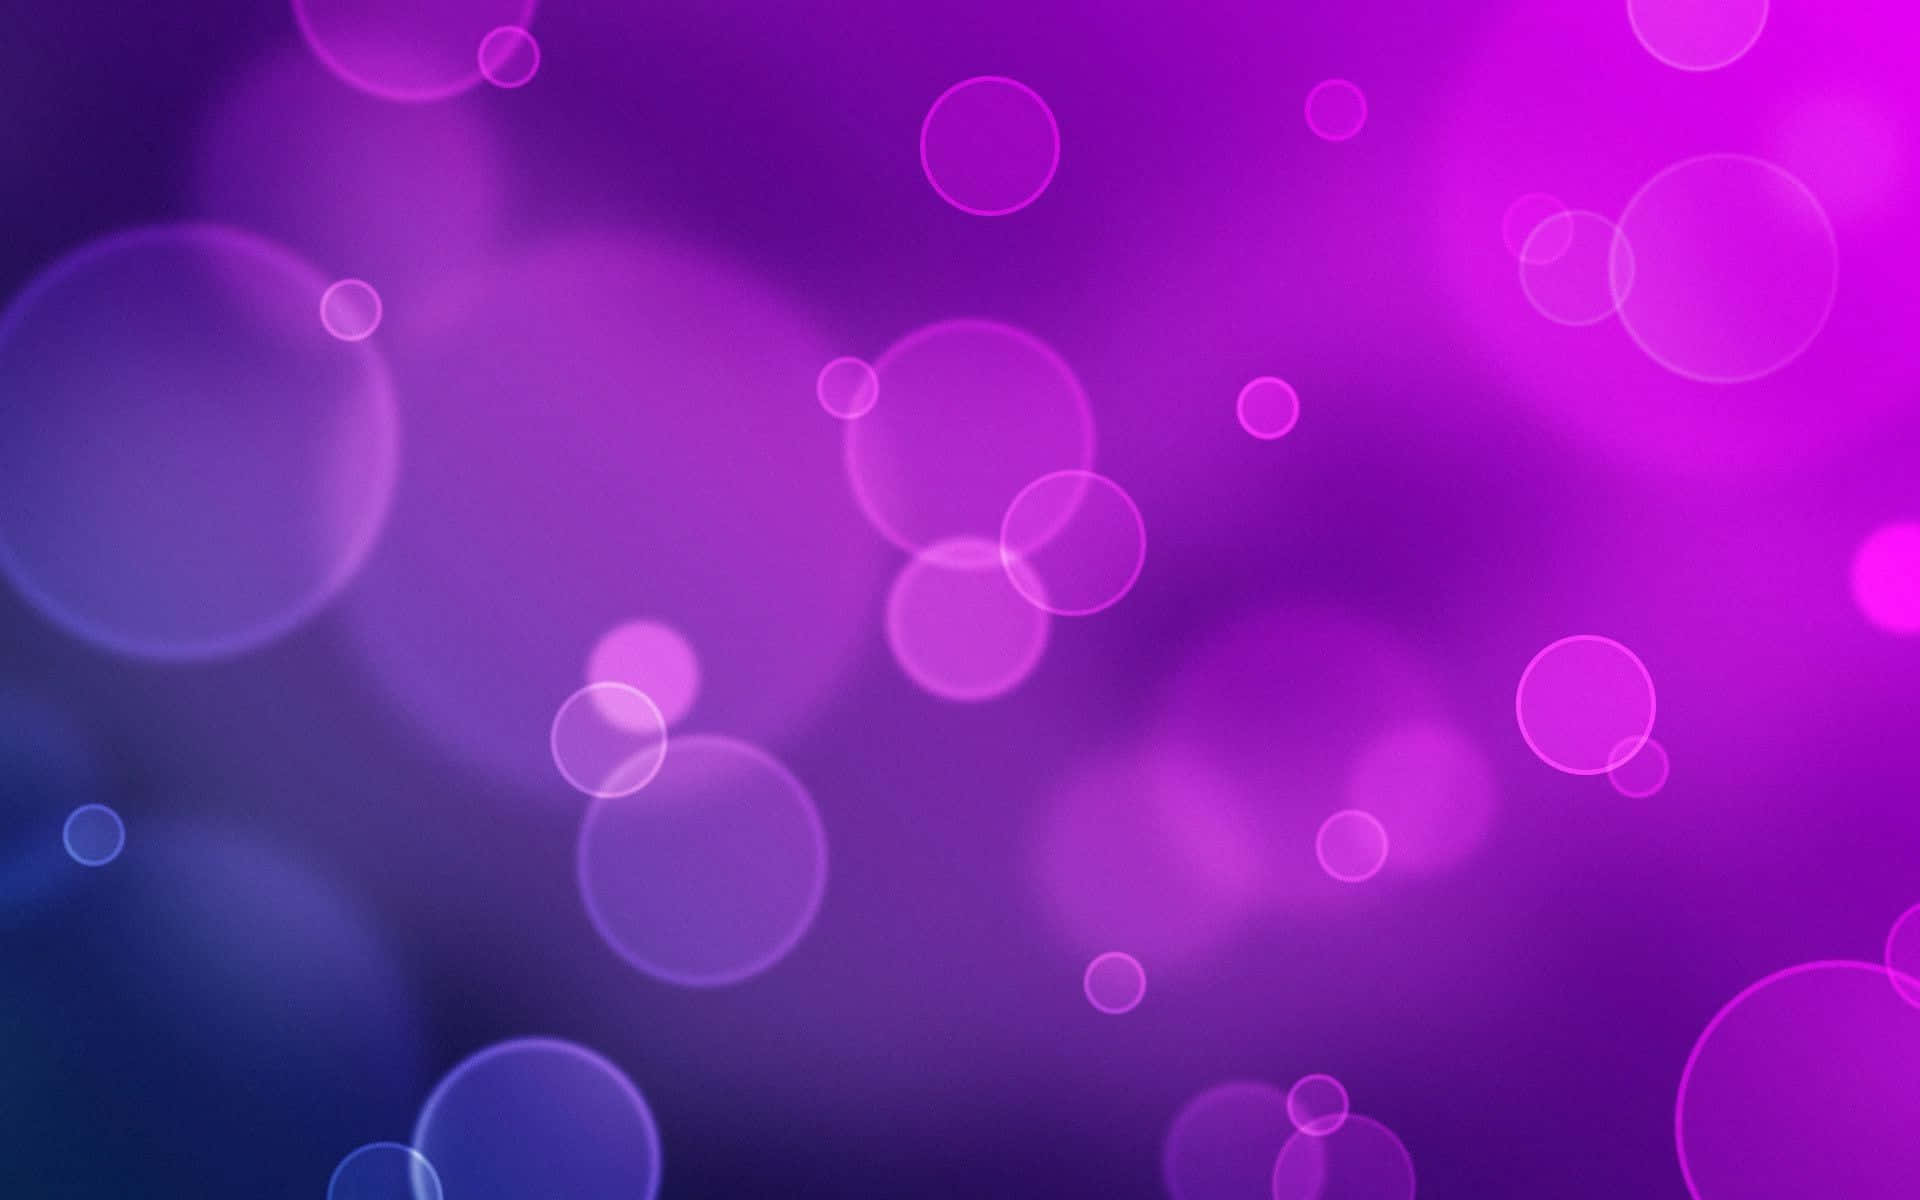 Enhance your work productivity with a Purple Laptop Wallpaper